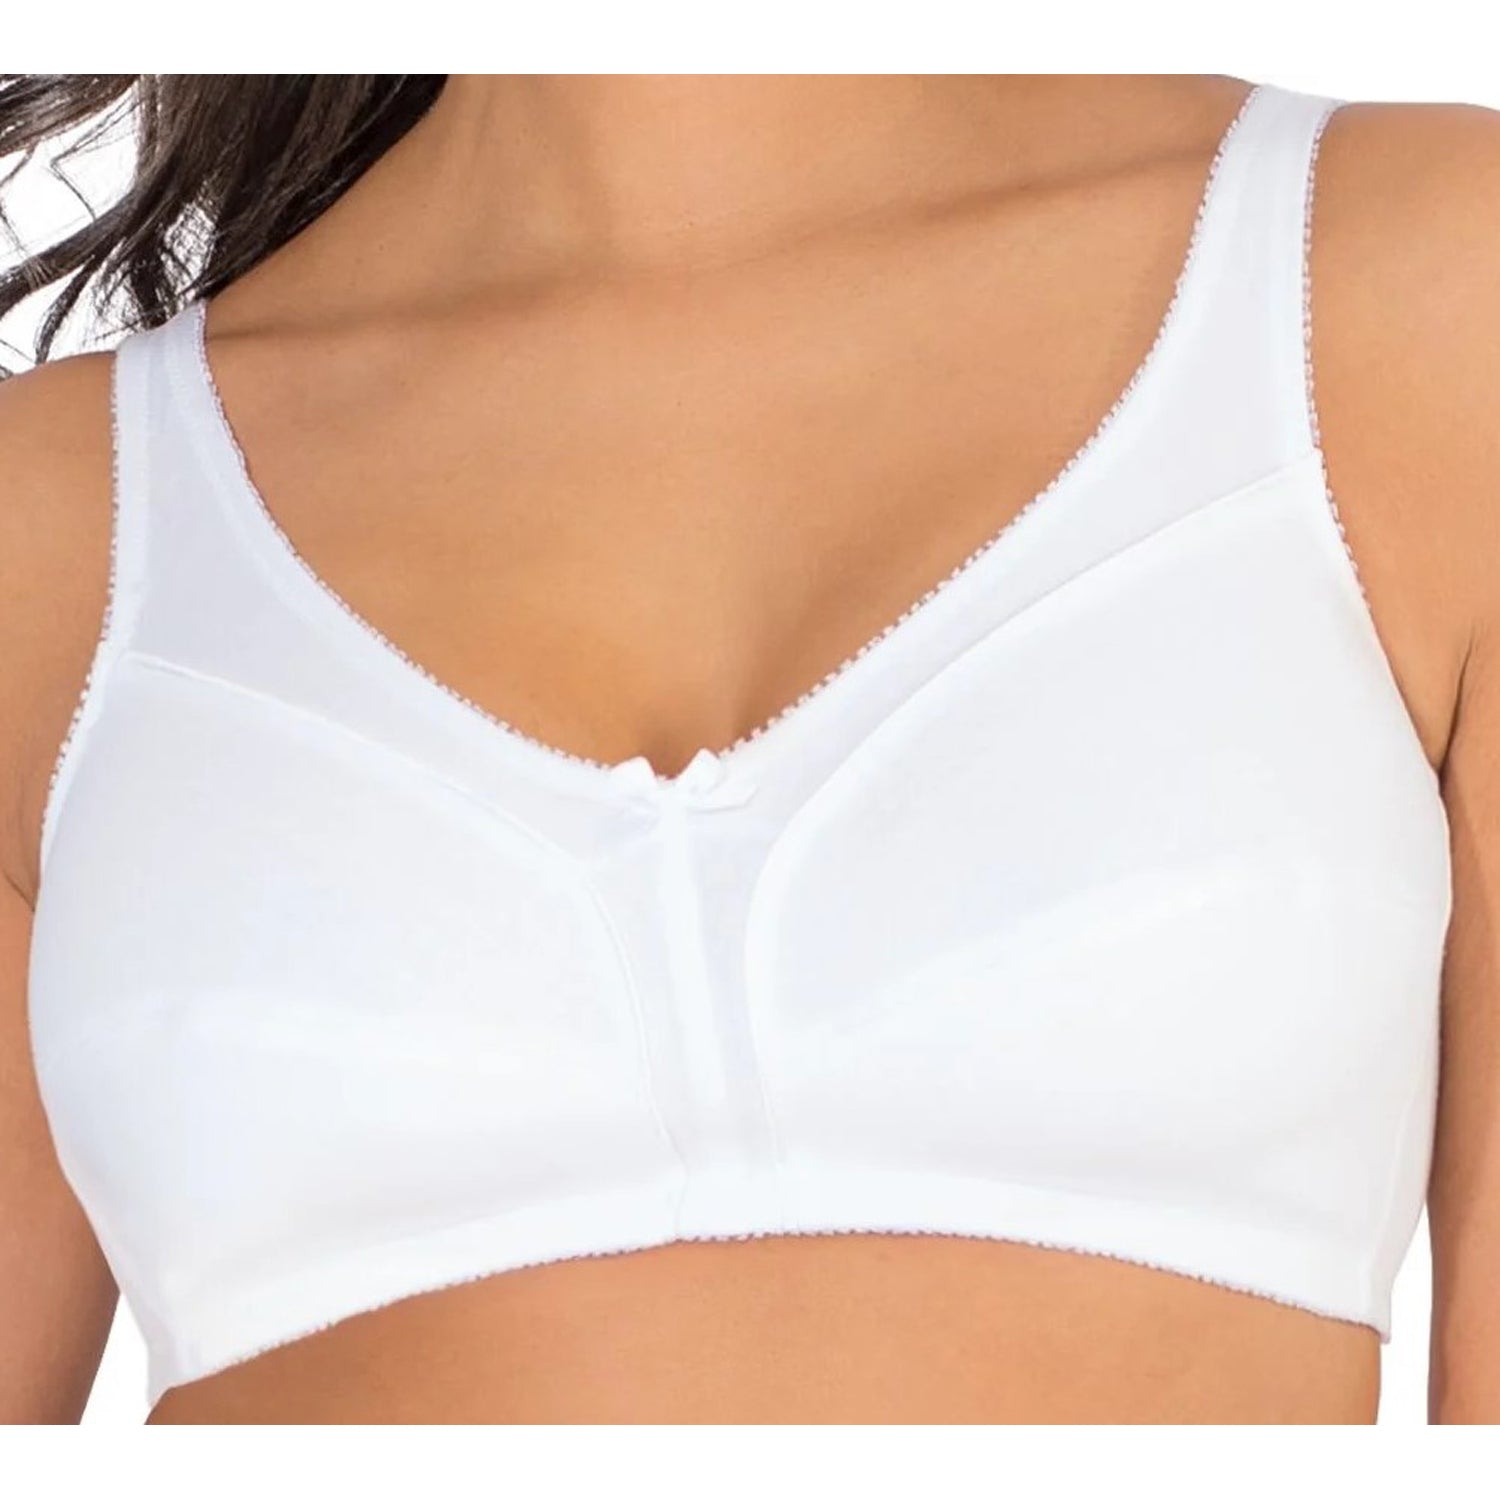 Fruit of the Loom Women's Seamed Soft Cup Wirefree Bra